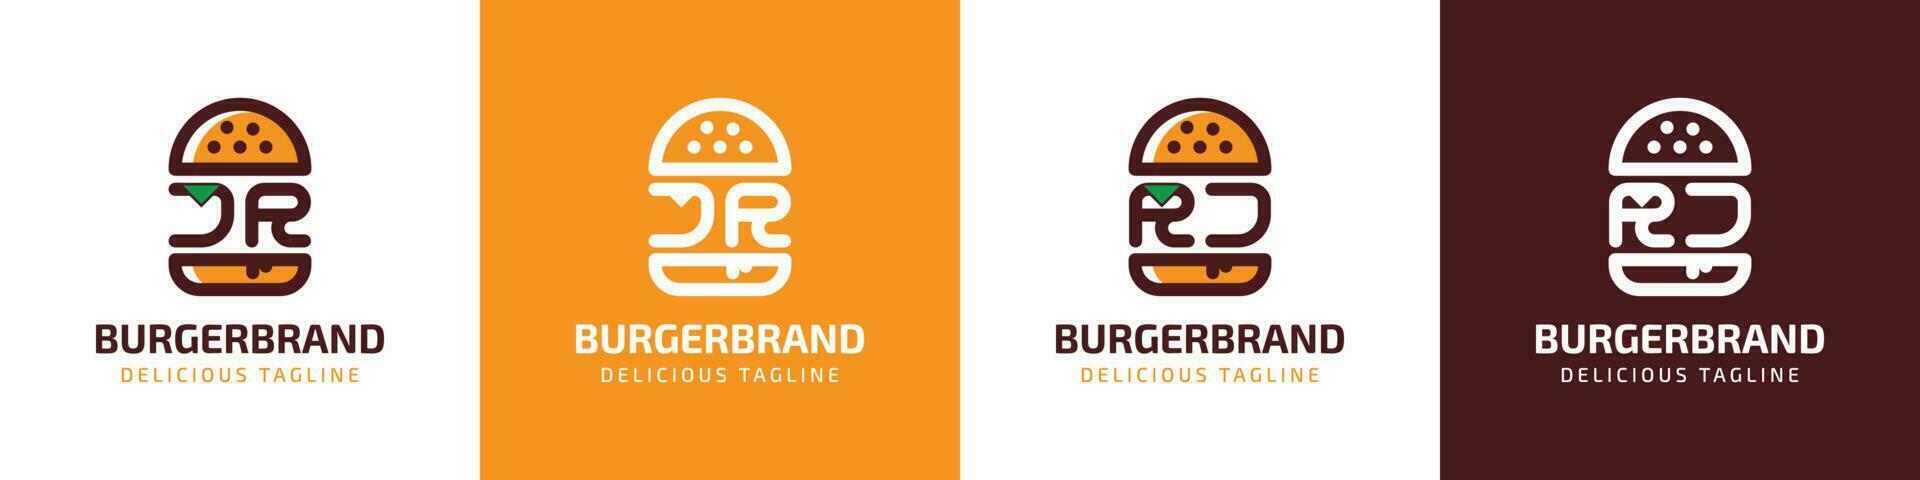 Letter JR and RJ Burger Logo, suitable for any business related to burger with JR or RJ initials. vector